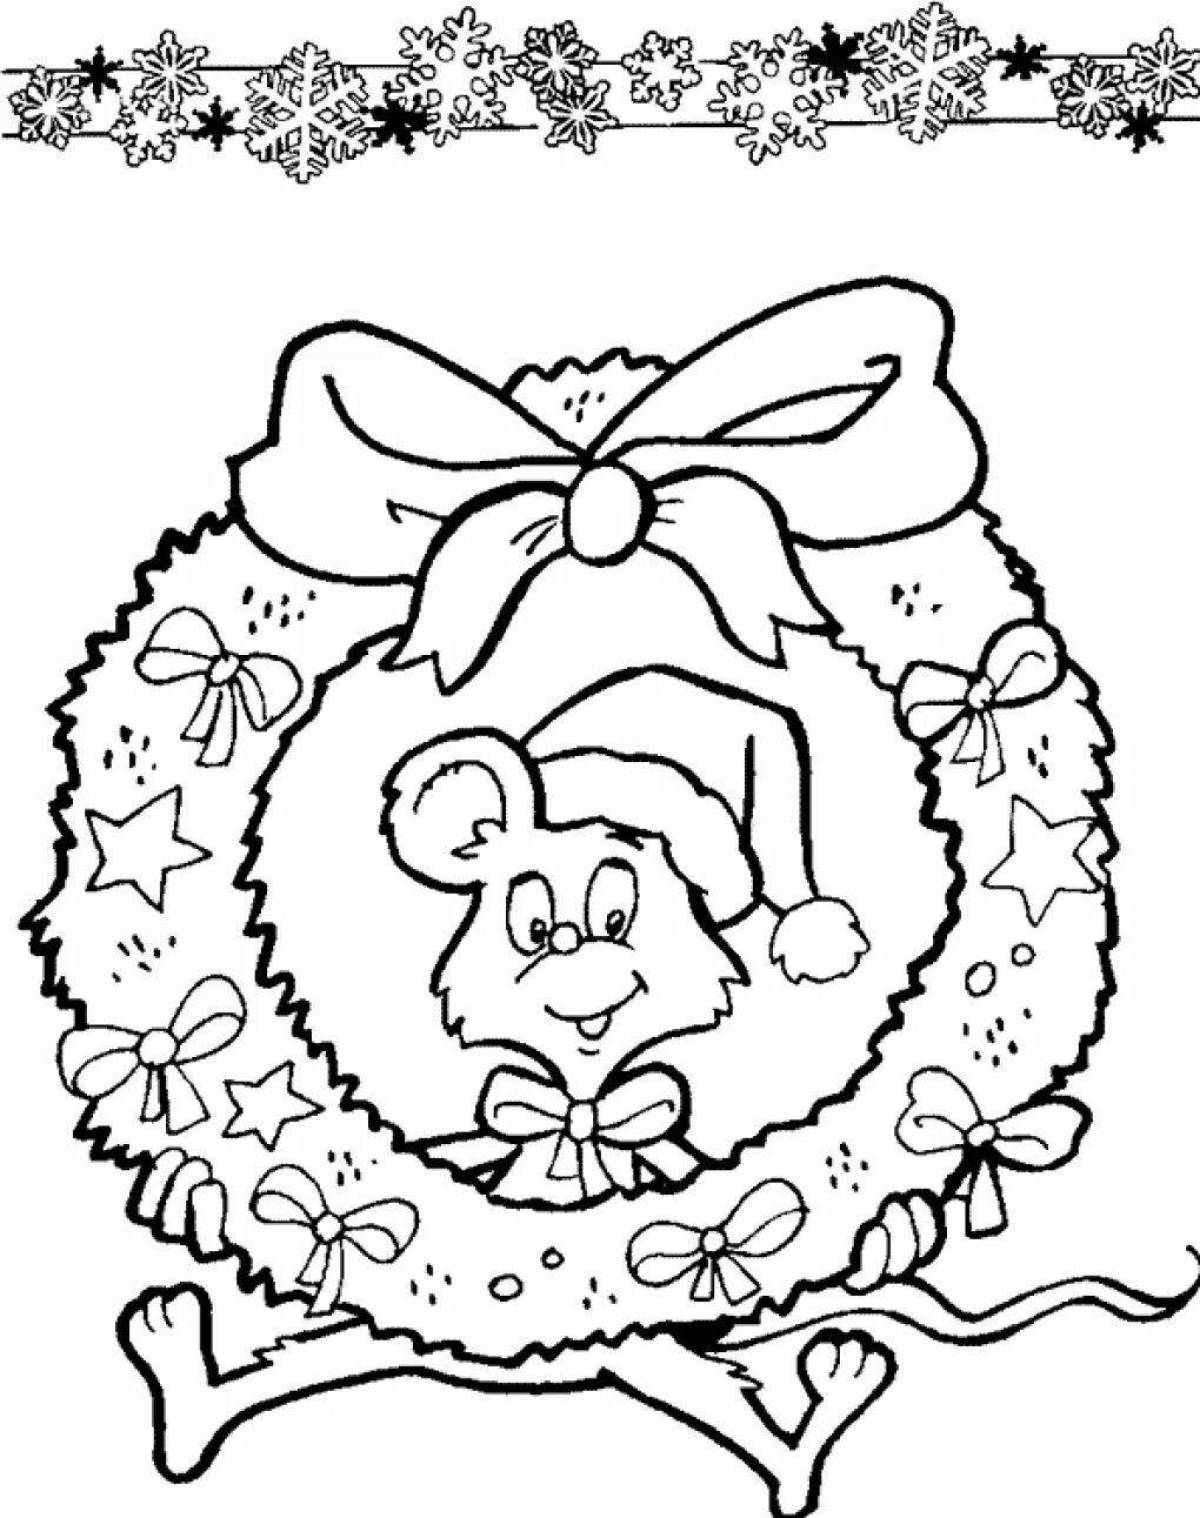 Glamourous Christmas wreath coloring book for kids